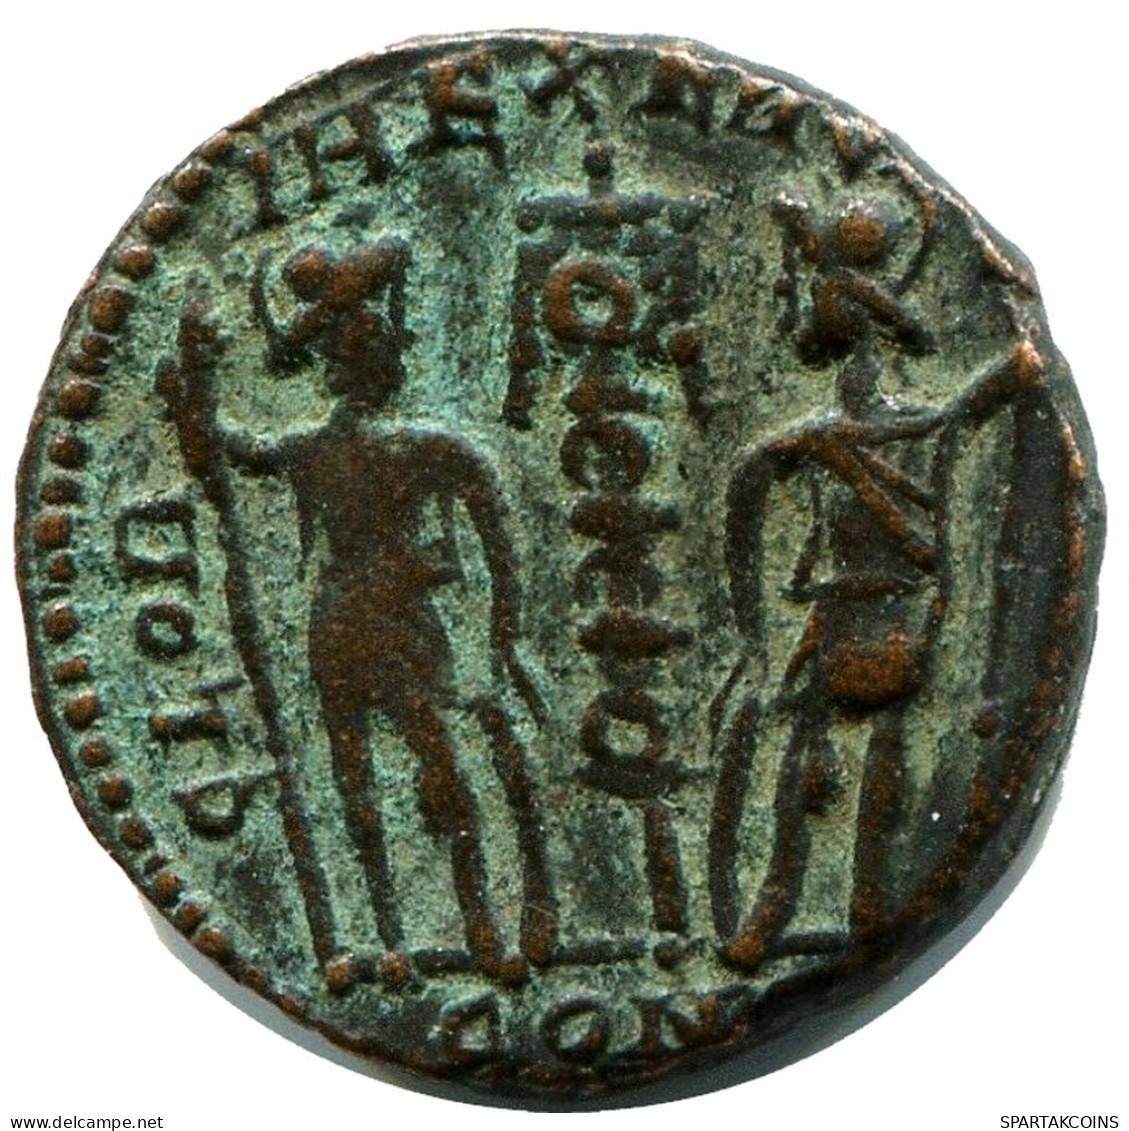 CONSTANS MINTED IN CONSTANTINOPLE FOUND IN IHNASYAH HOARD EGYPT #ANC11922.14.F.A - El Impero Christiano (307 / 363)